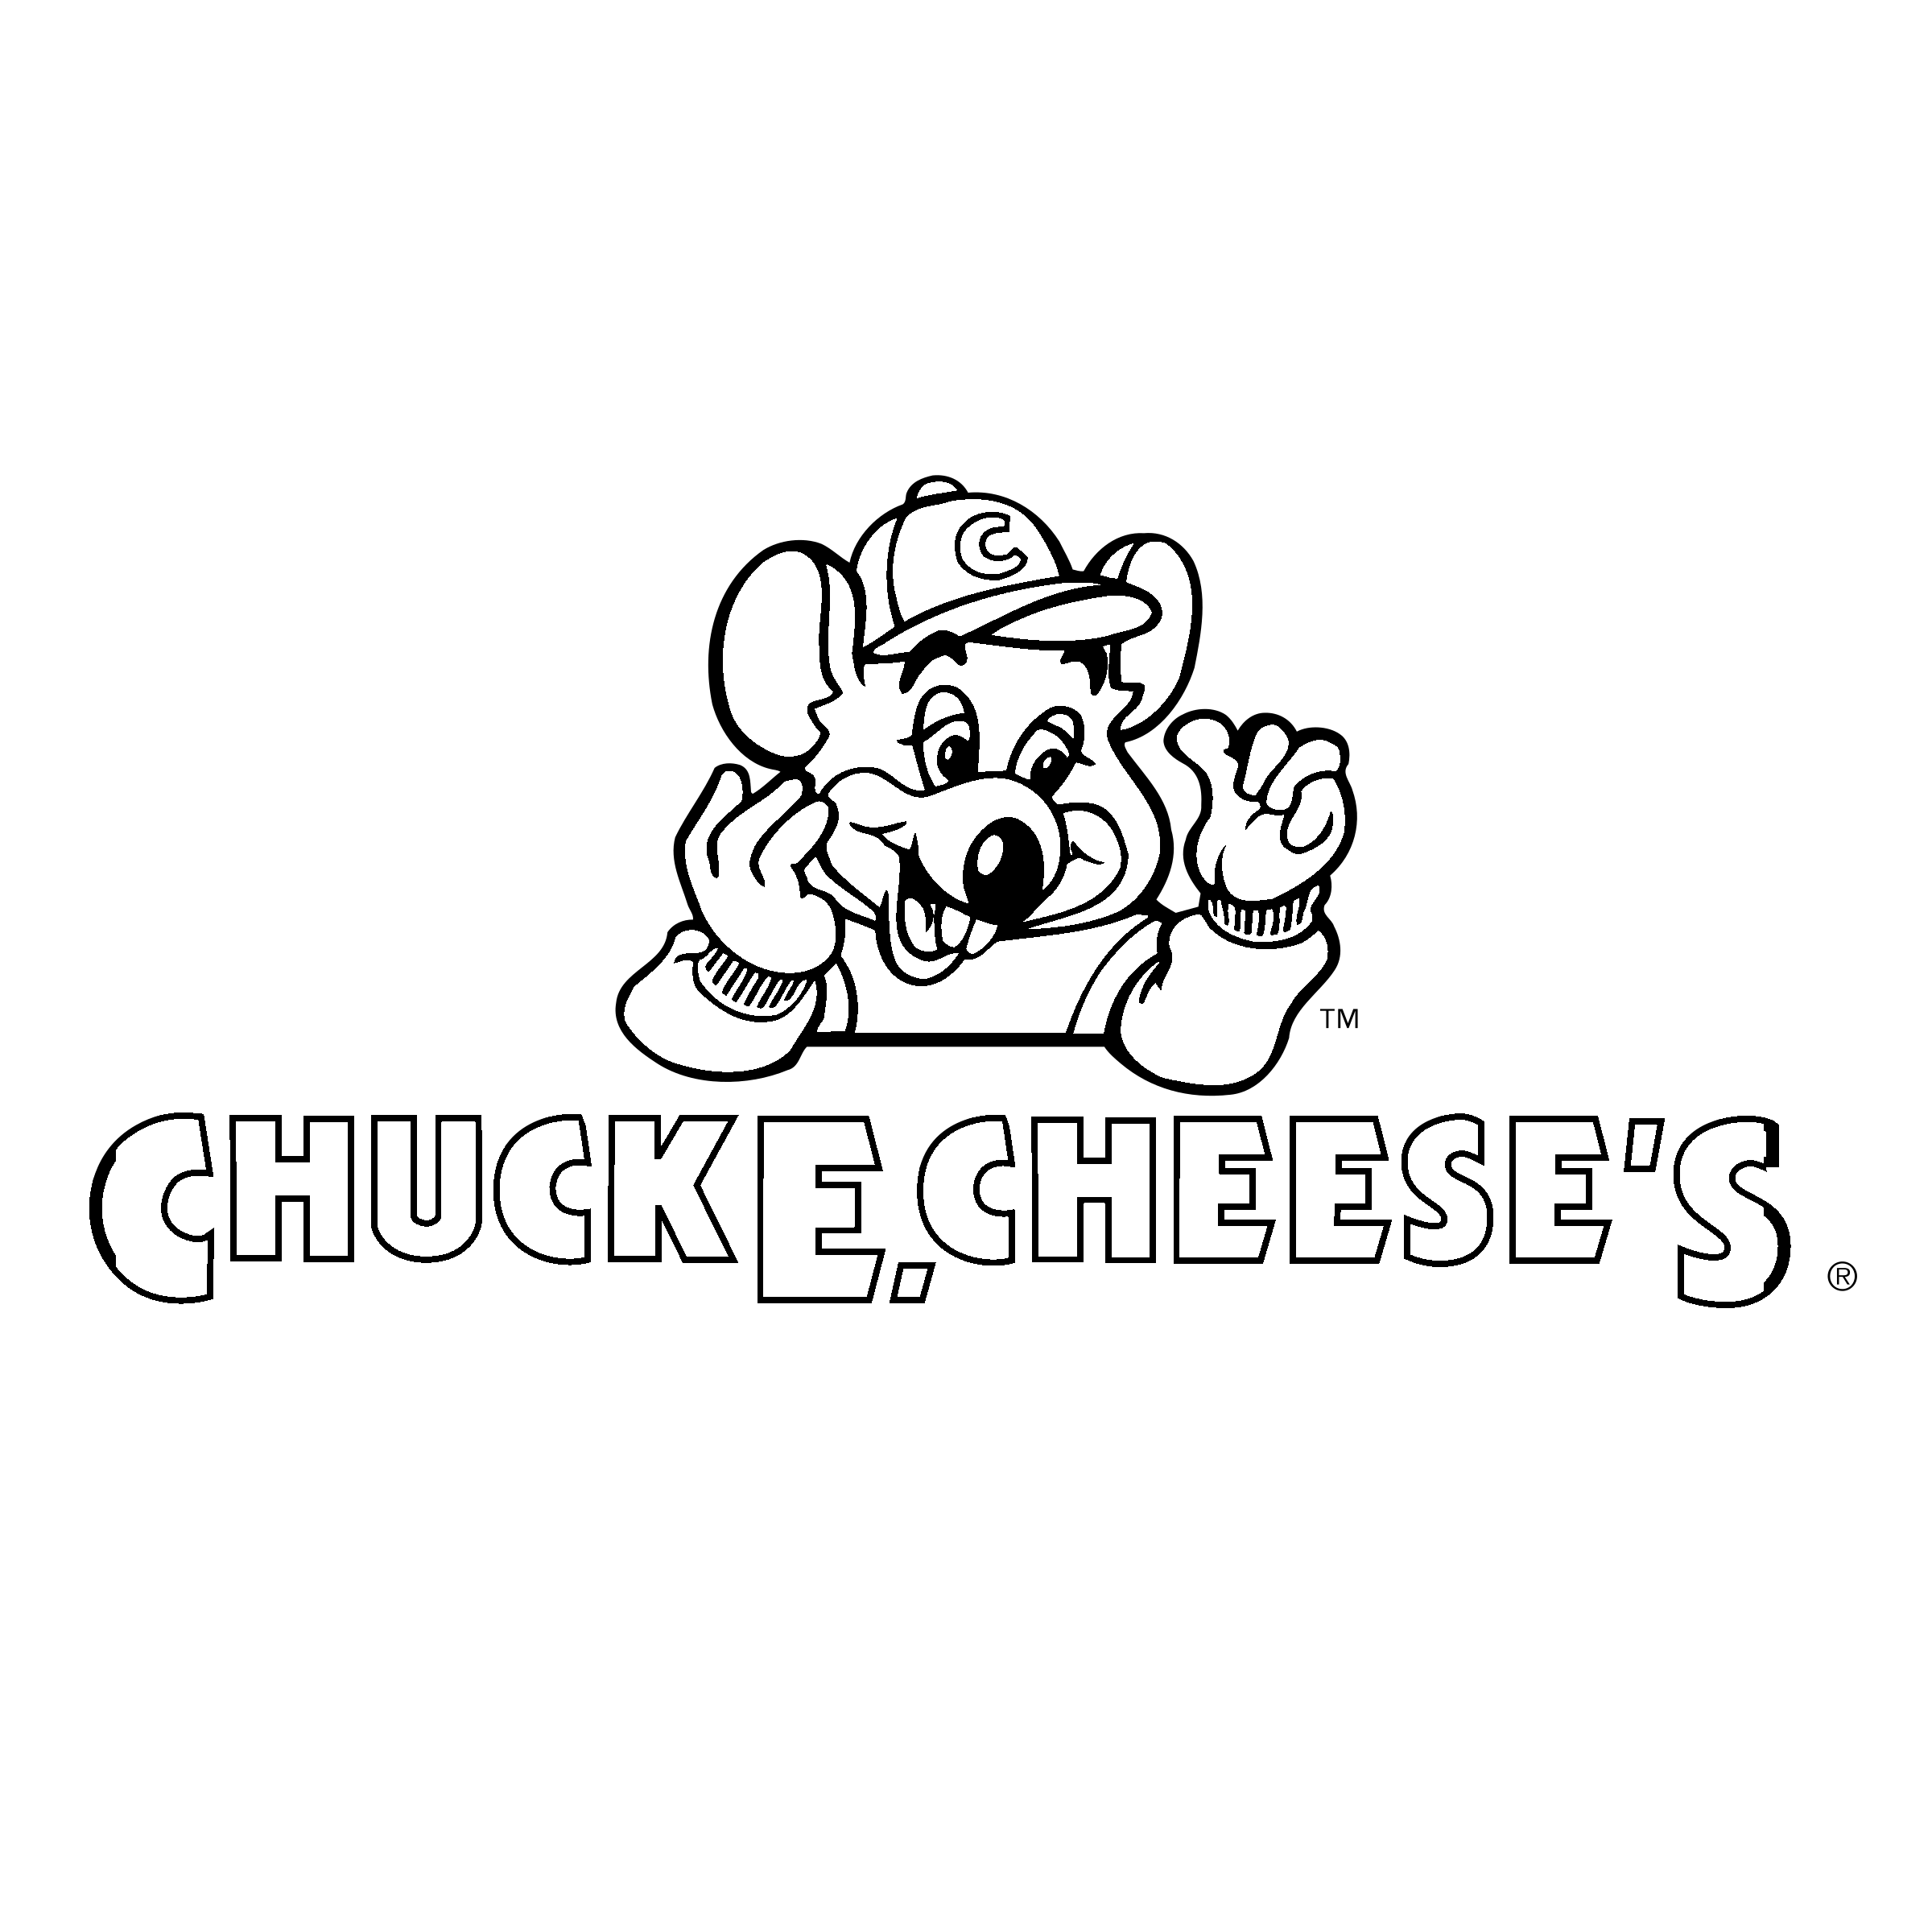 Cheese White Logo - Chuck E Cheese's Logo PNG Transparent & SVG Vector - Freebie Supply